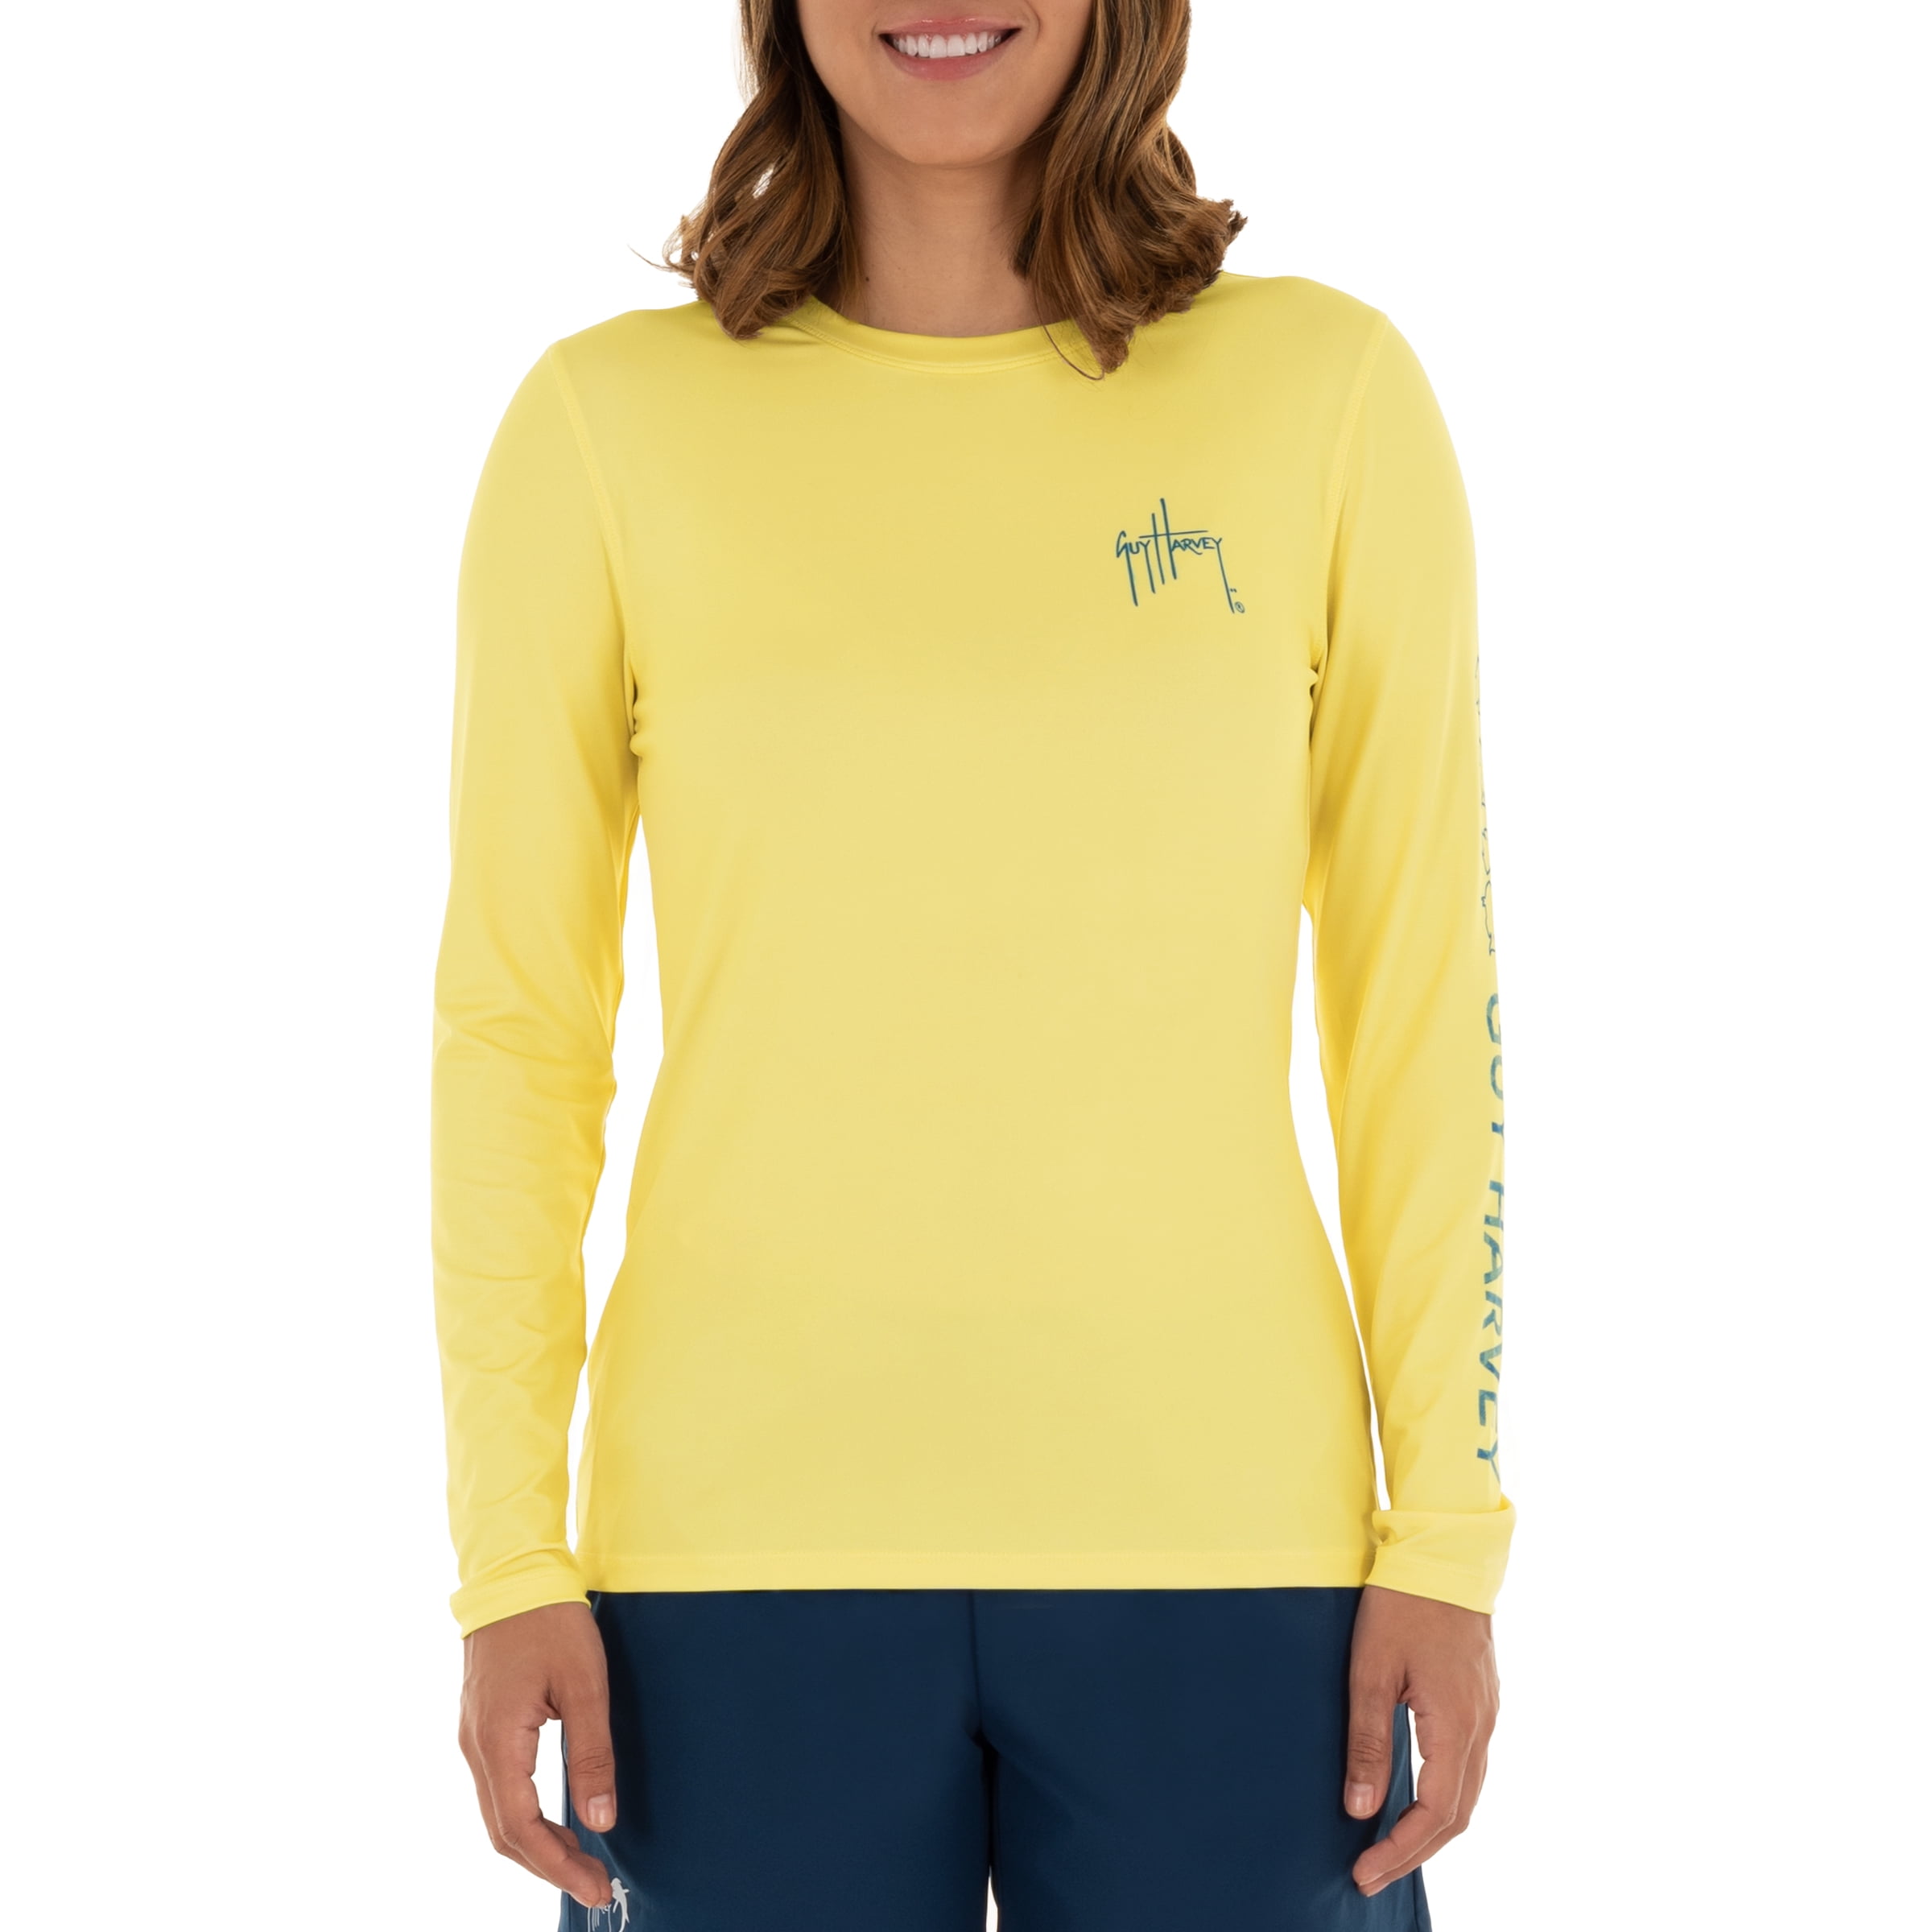 Guy Harvey Women's Solid Long Sleeve Sun Protection Top XX-Large